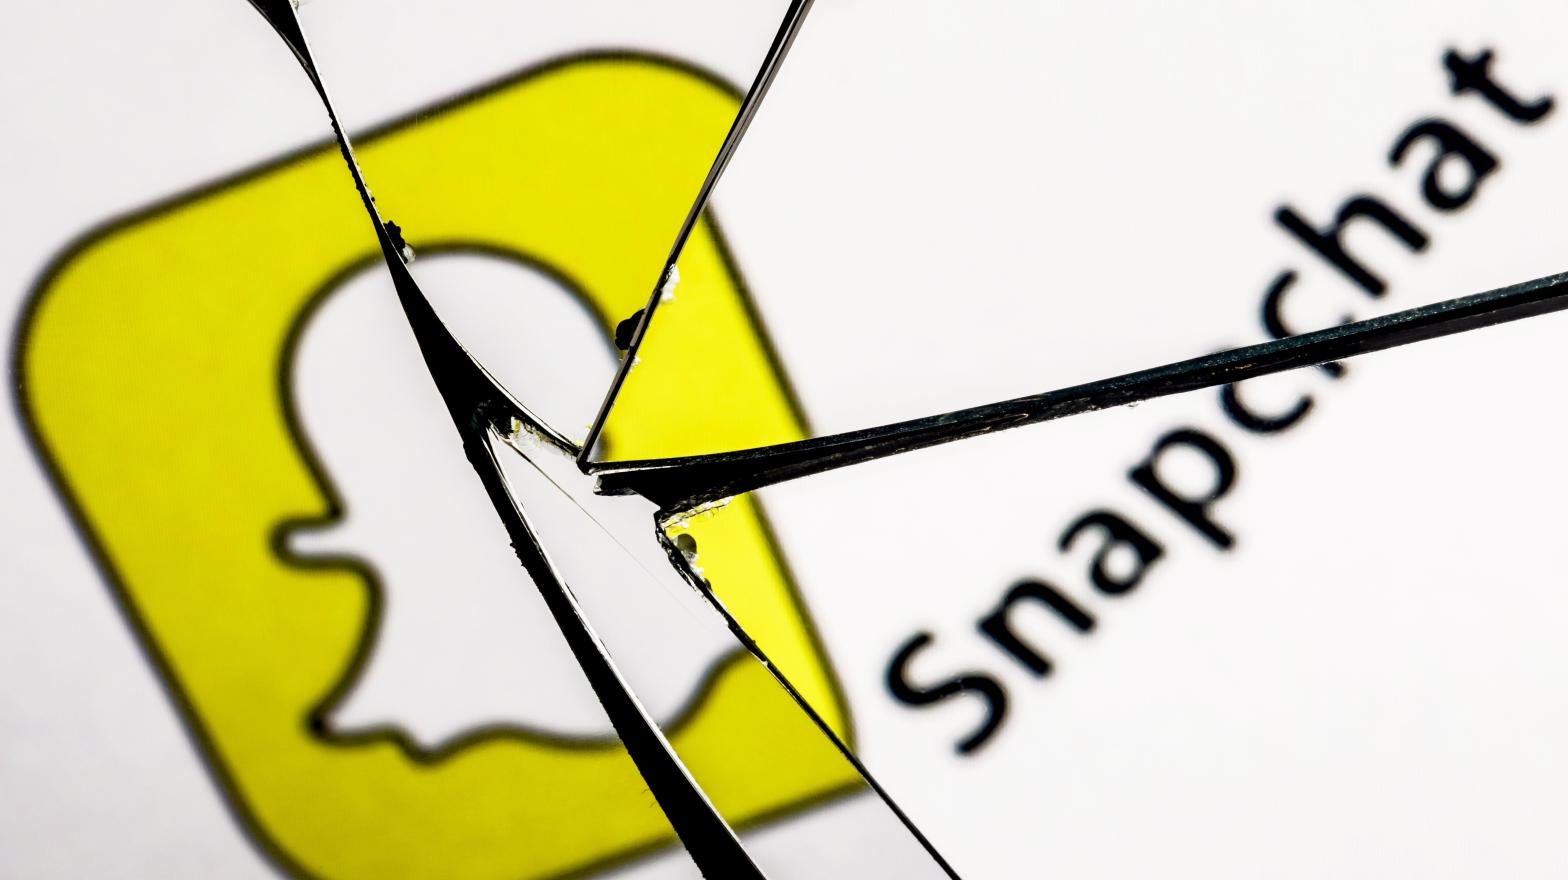 A report from The Verge says that more than 20% of the workers at Snap will be laid off. (Image: Sergei Elagin, Shutterstock)